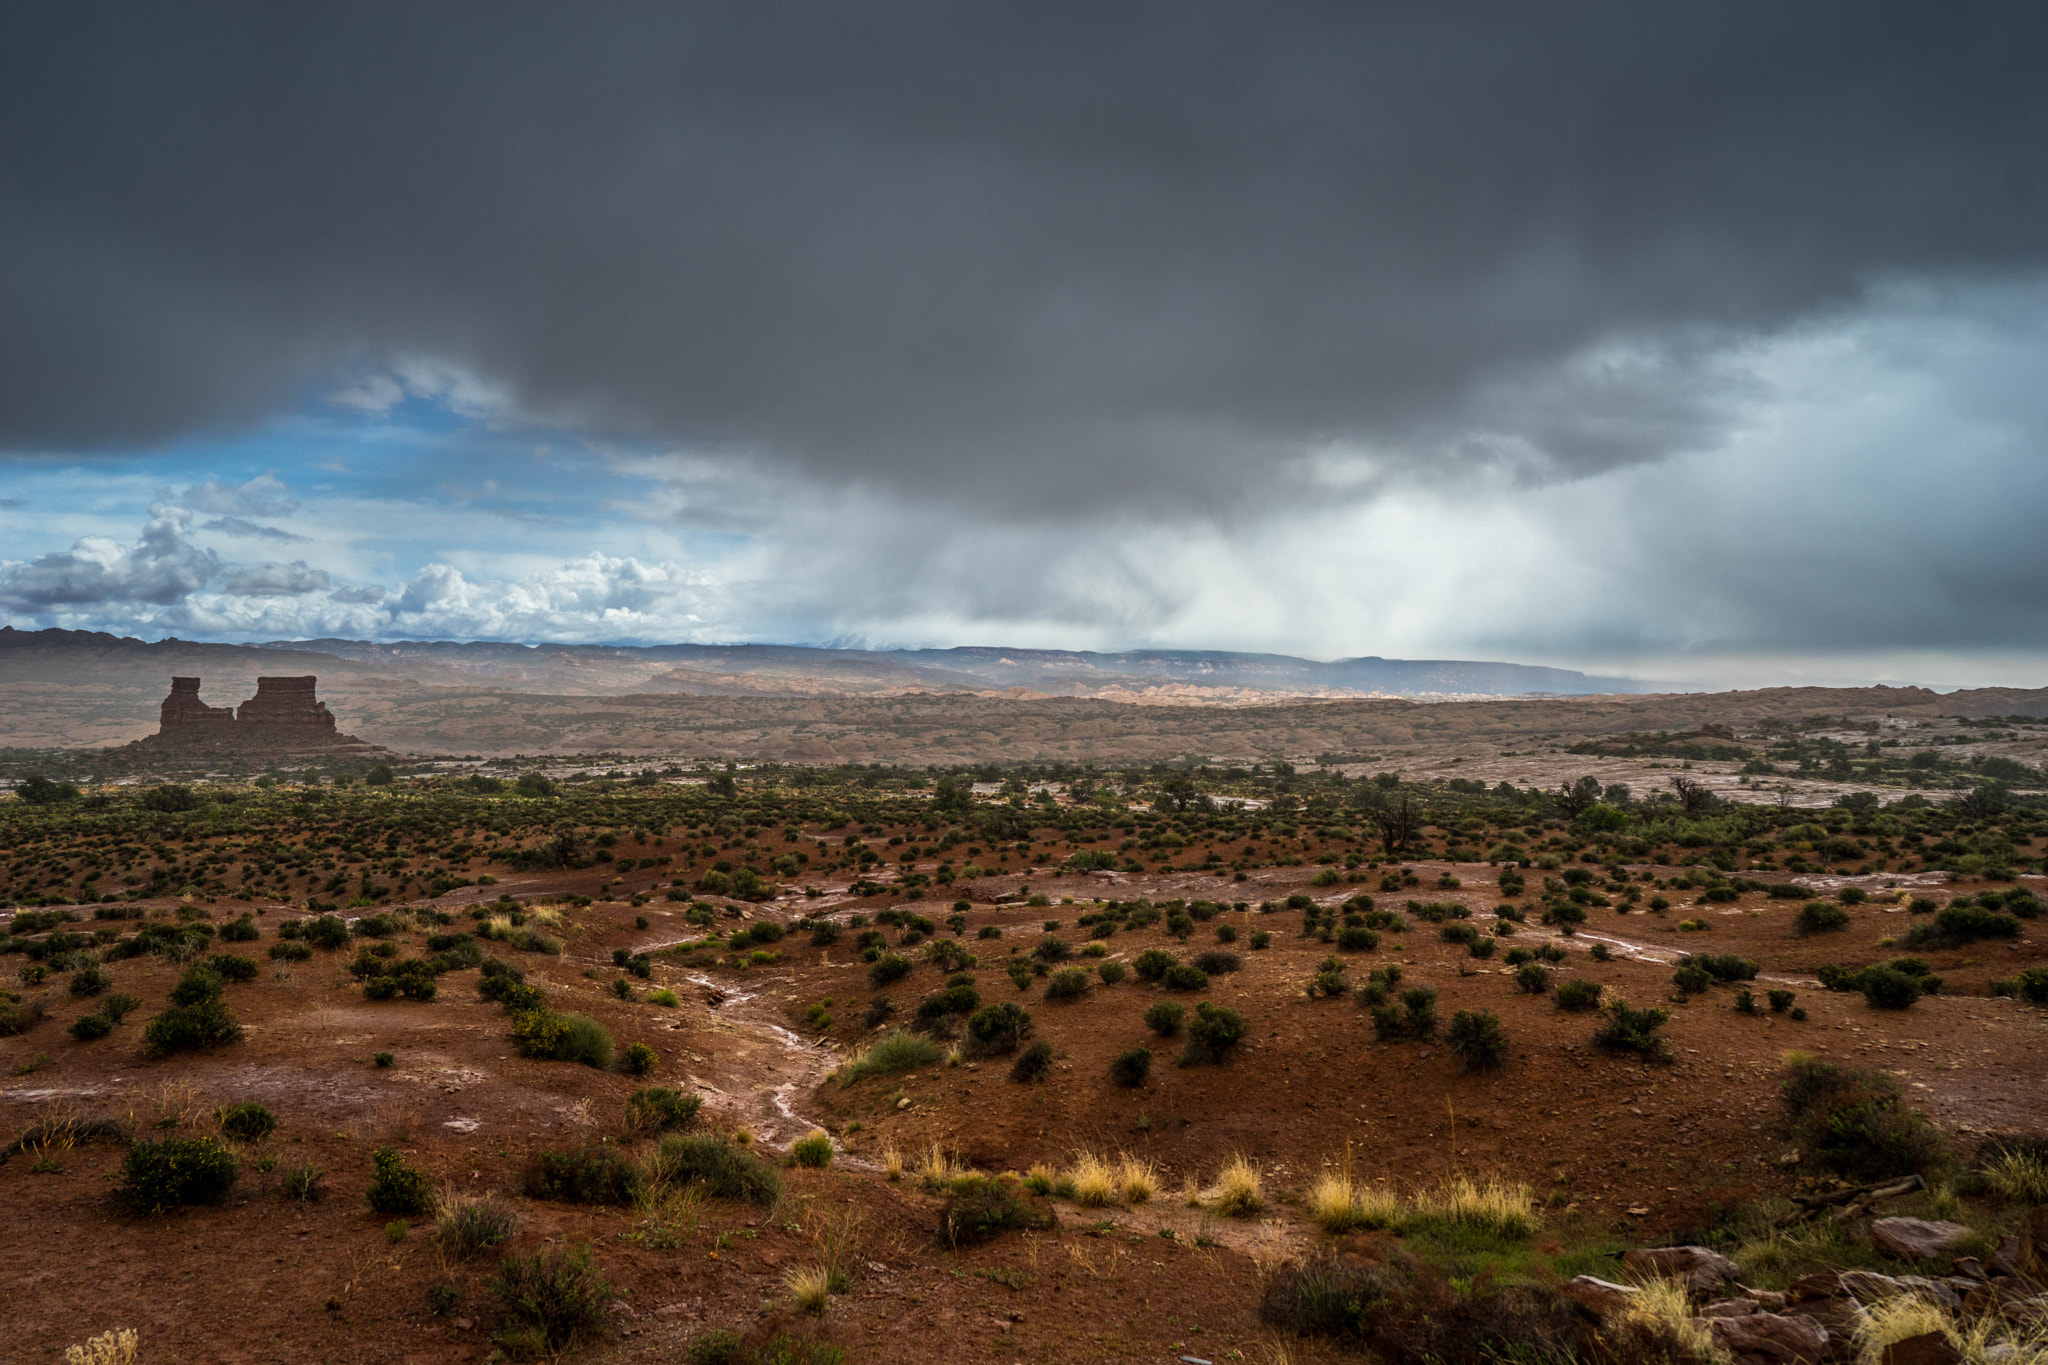 Sony a7 II sample photo. Storm over the desert photography